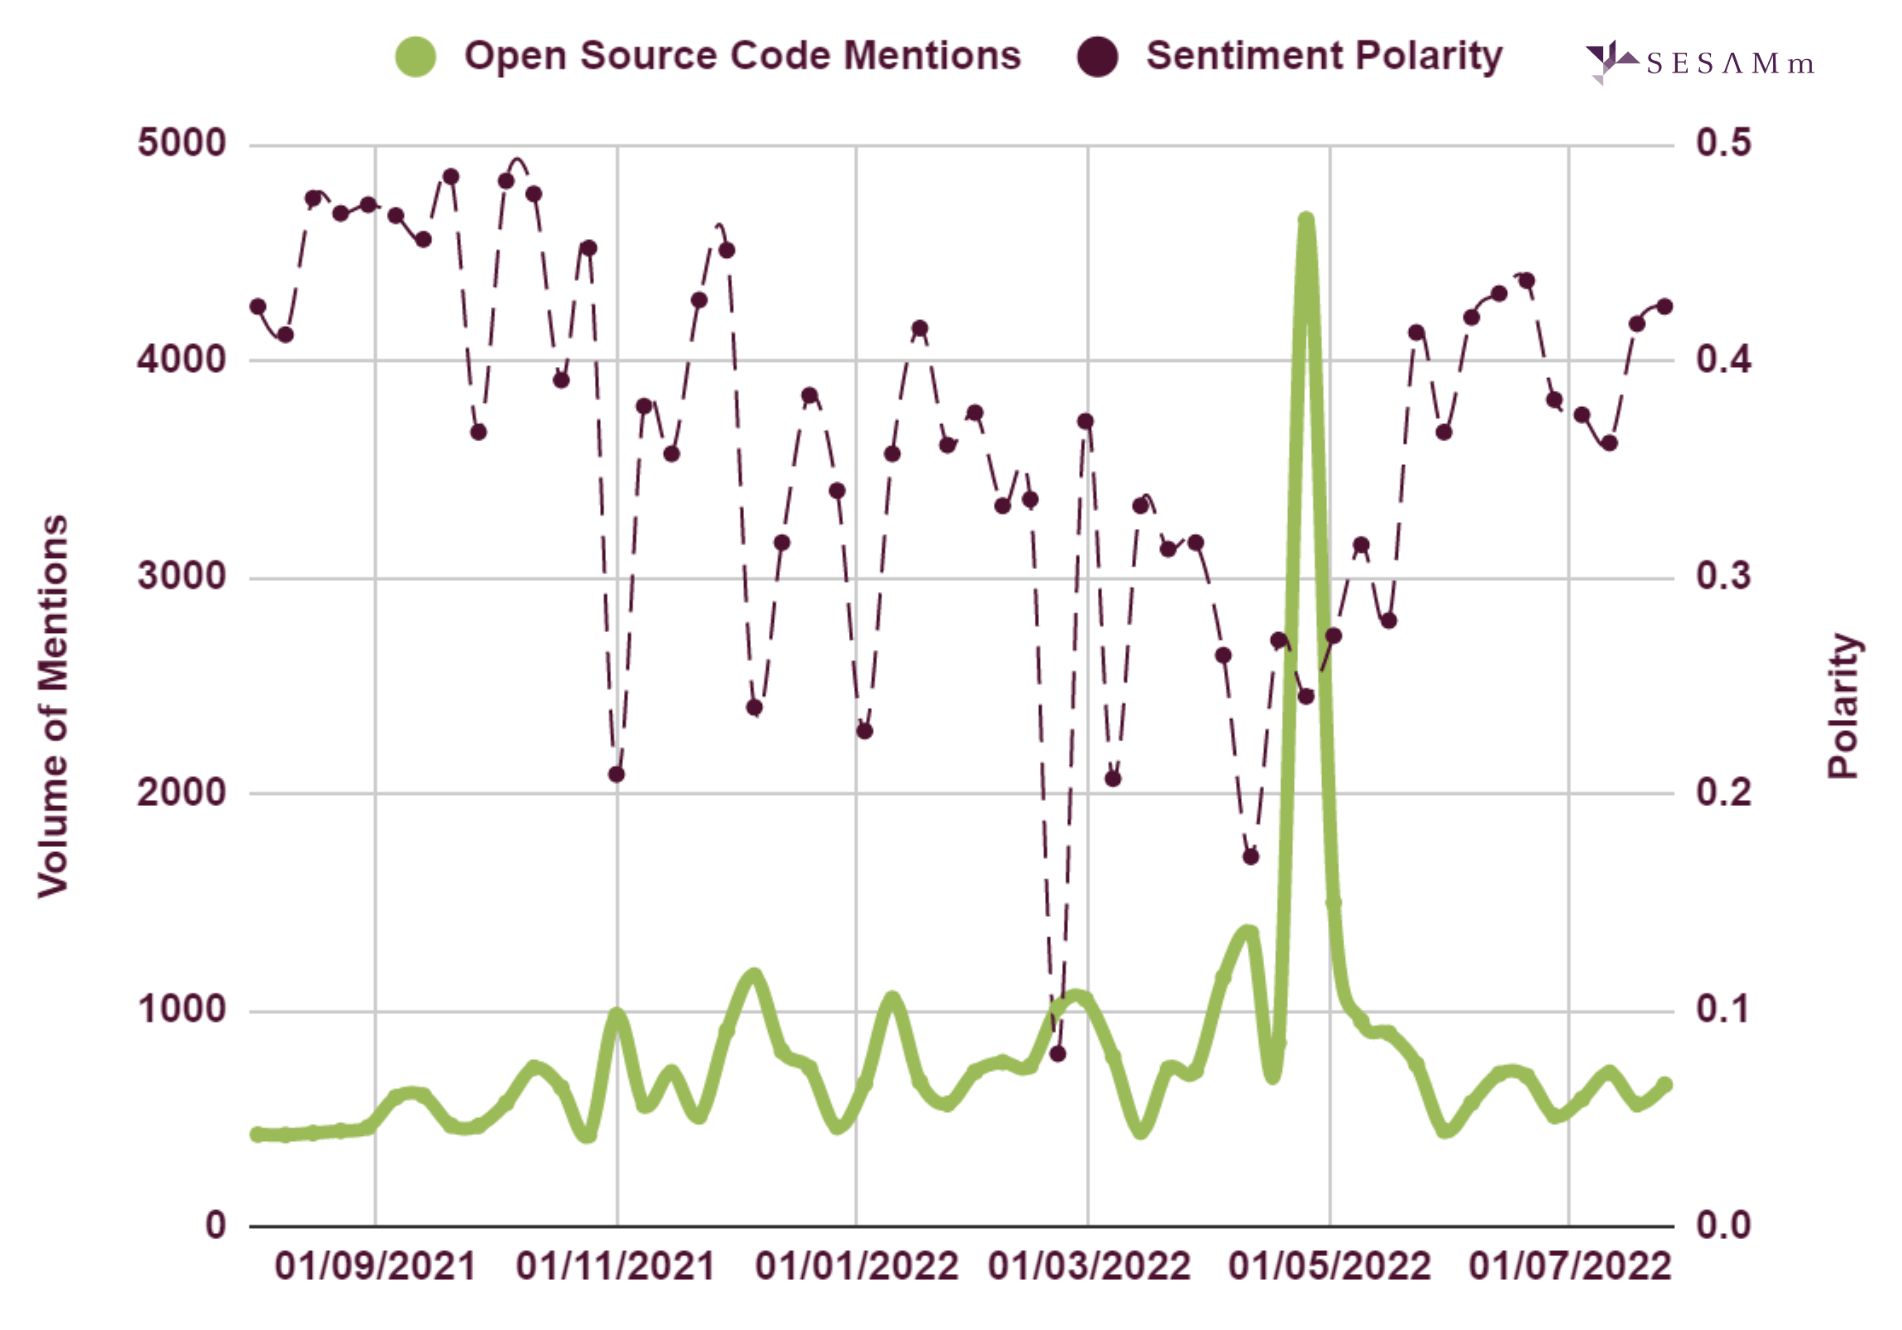 Mention volume and polarity chart for the open source code topic